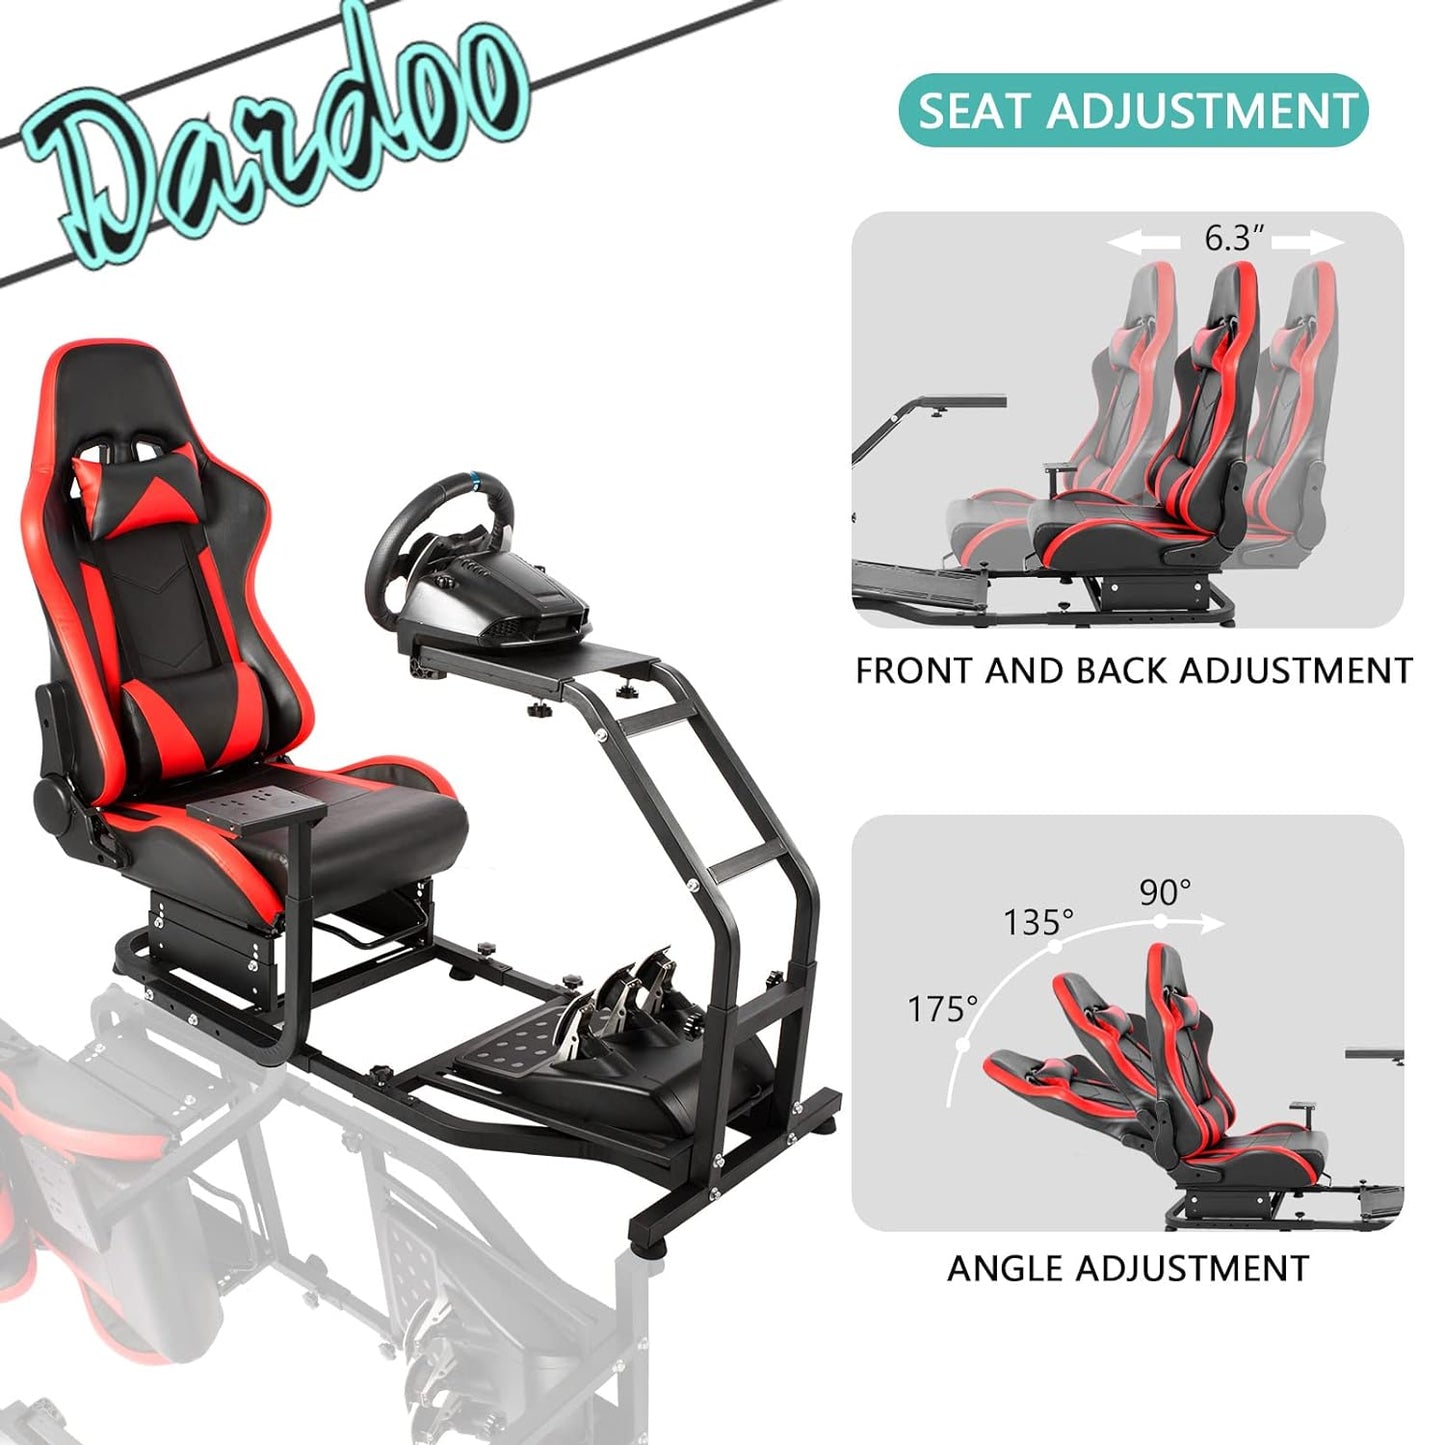 Dardoo Adjustable Gaming Sim Cockpit With Red Seat Fits for Logitech G29 G920 G923 Thrustmaster T300 Racing Steering Wheel Stand, Not Including Steering Wheel, Pedal and Handbrake